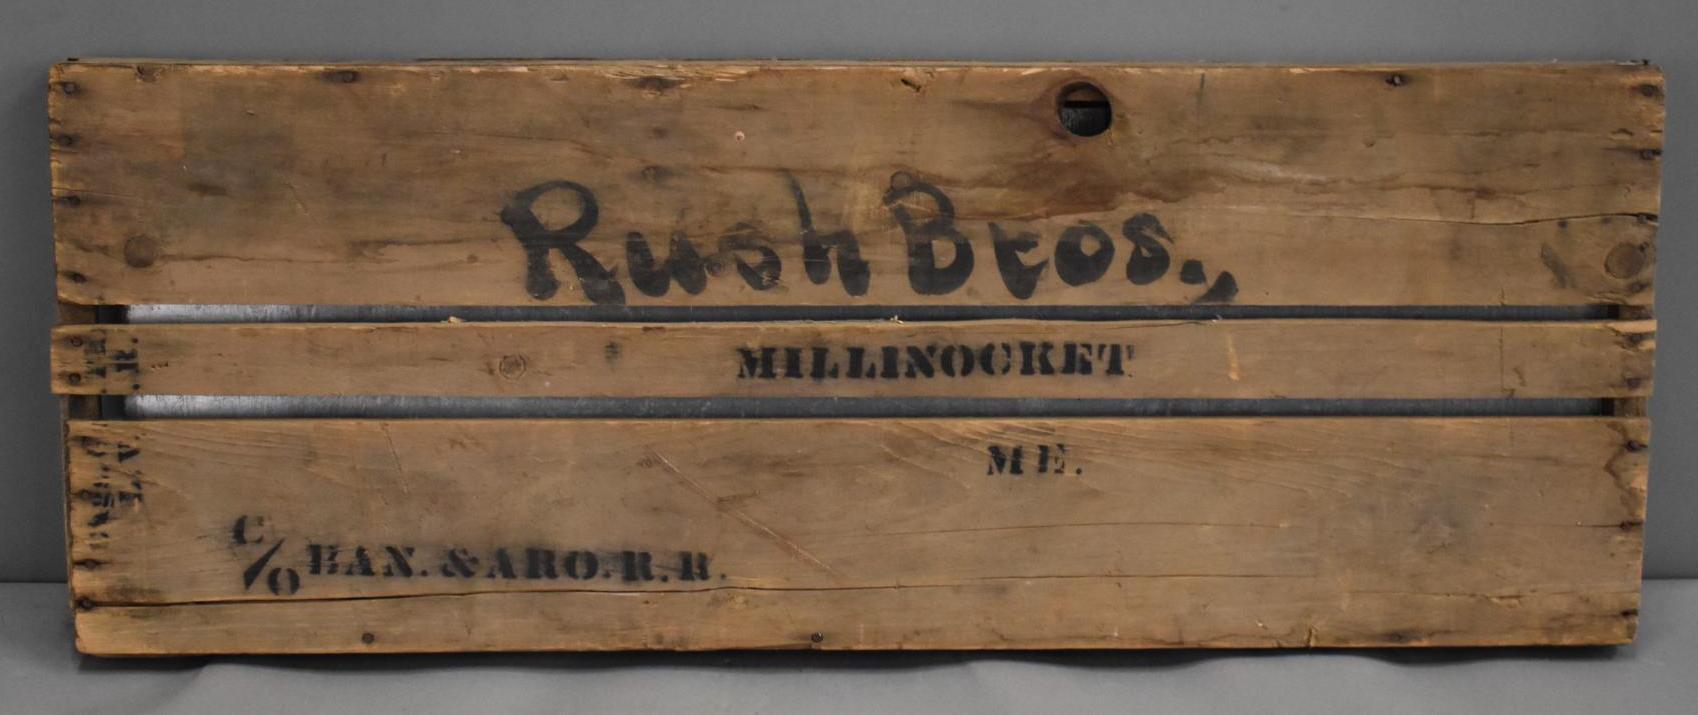 Rubber Goods Rush Bros Metal Sign w/Shipping Crate